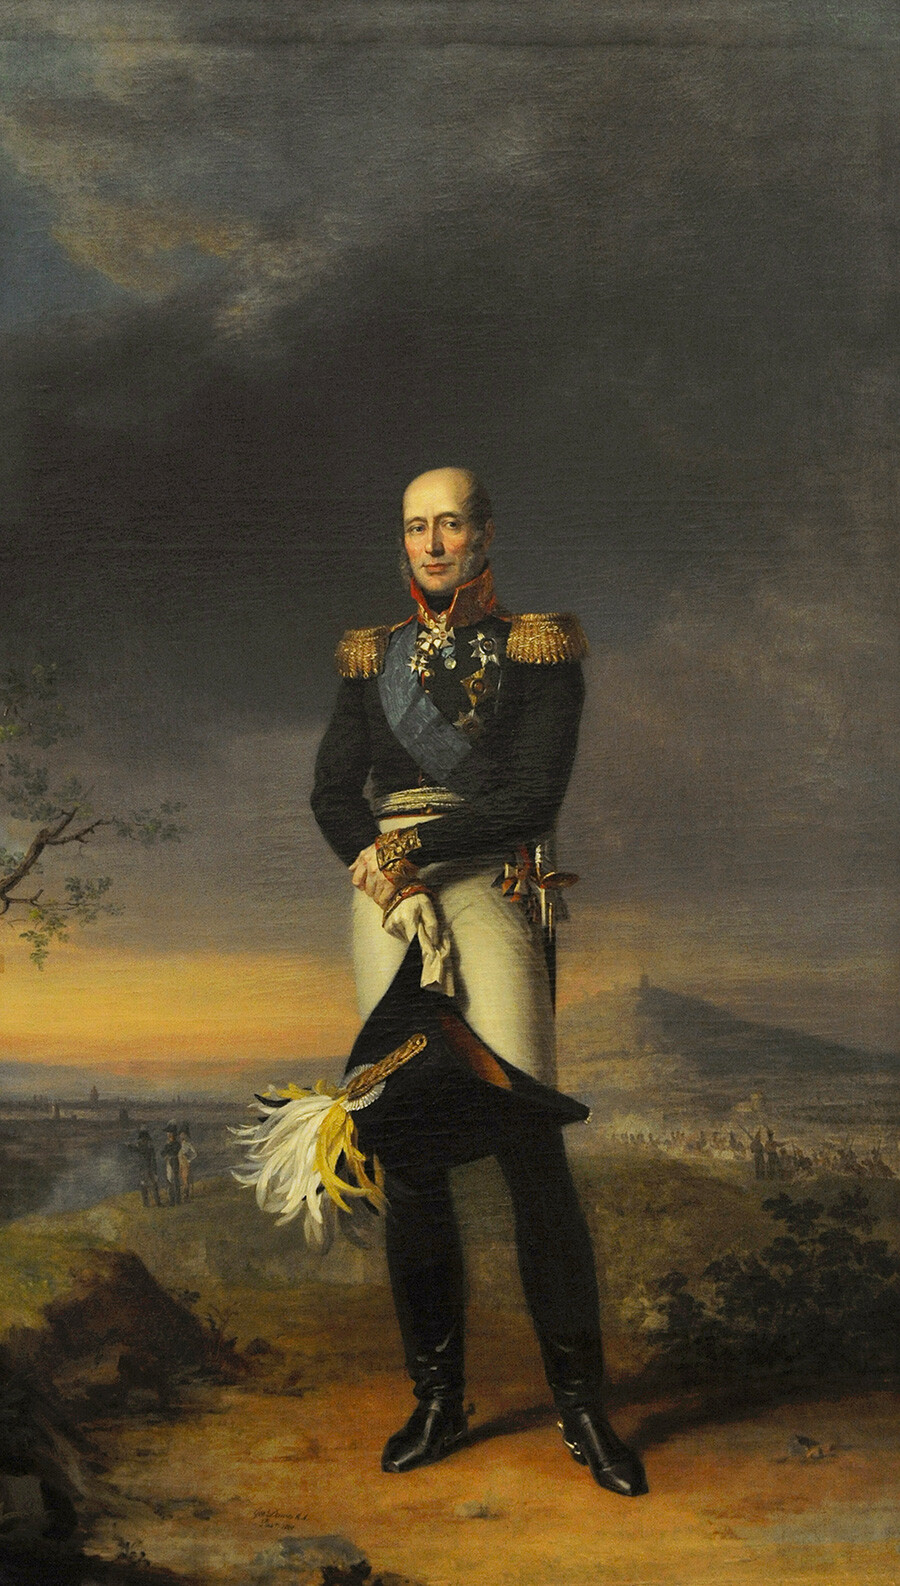 Mikhail B. Barclay de Tolly (1761-1818). Russian Fieldmarshal and Minister of War. Portrait by George Dawe (1781-1829), 1829. The State Hermitage Museum, Saint Petersburg, Russia.